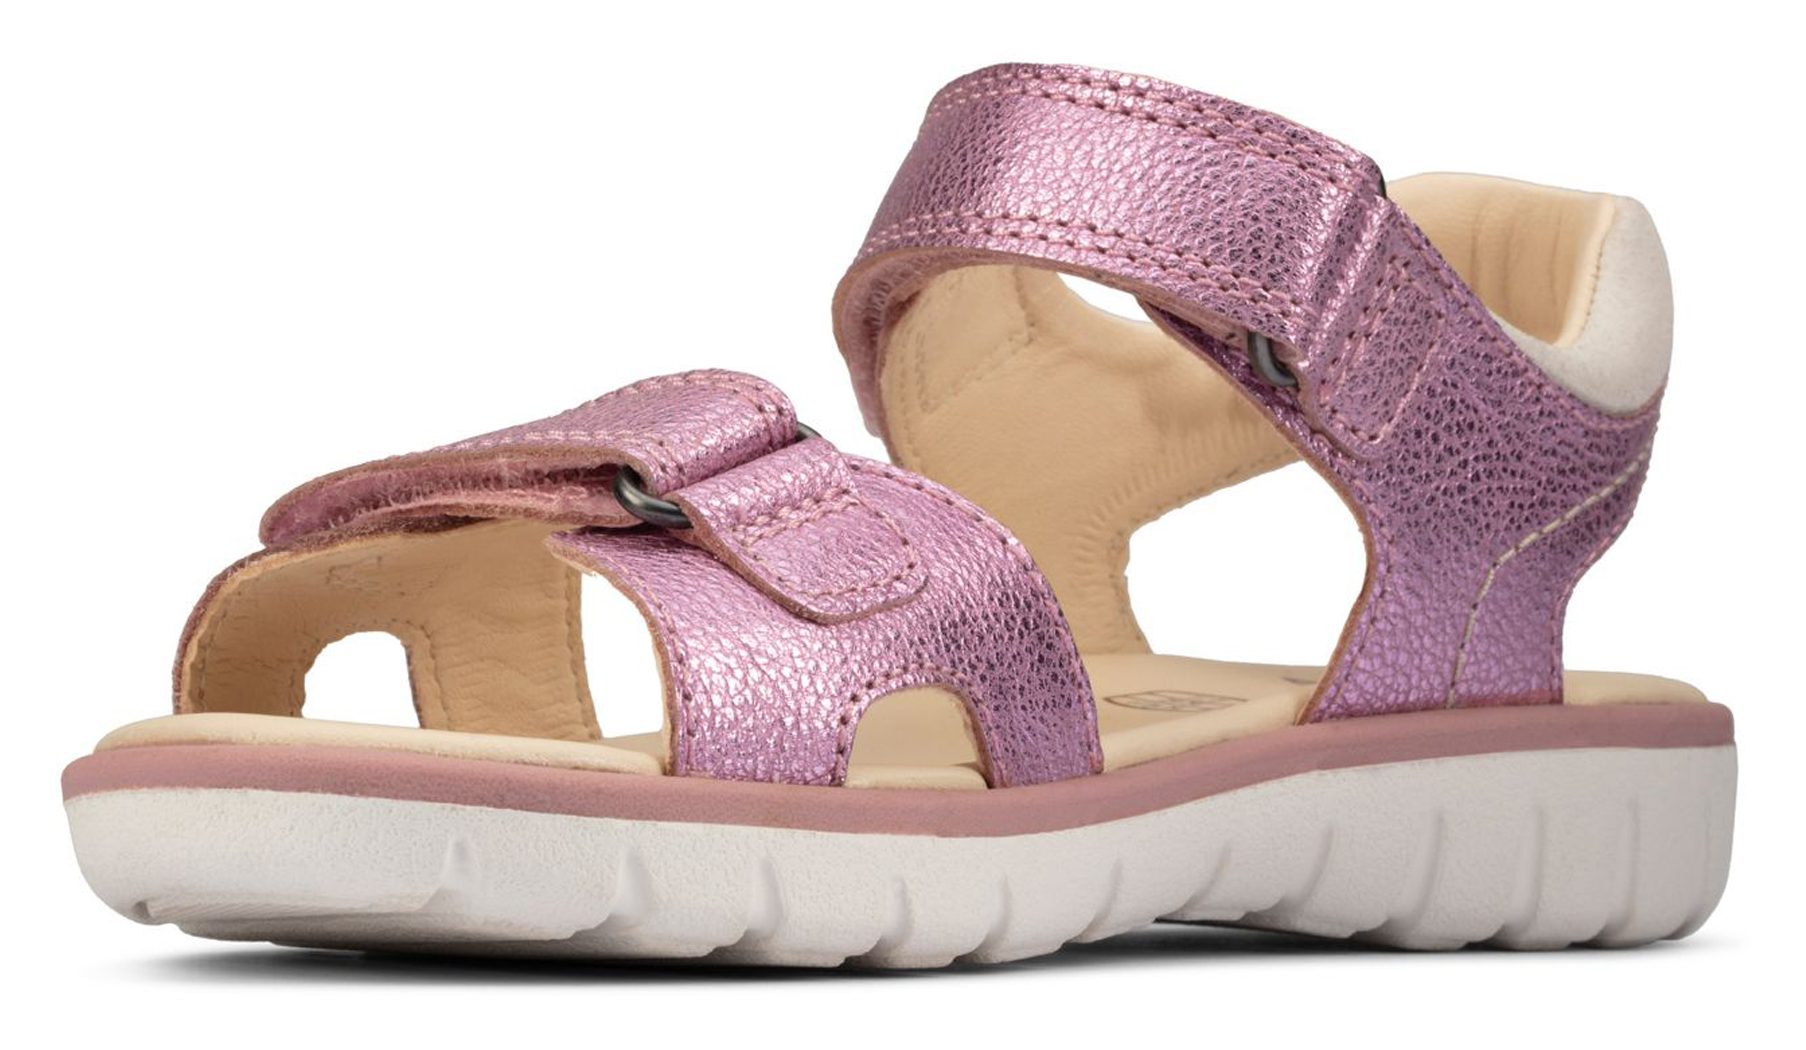 Clarks Roam Surf Youth Light Pink Leather 26158062 - Girls Sandals ...